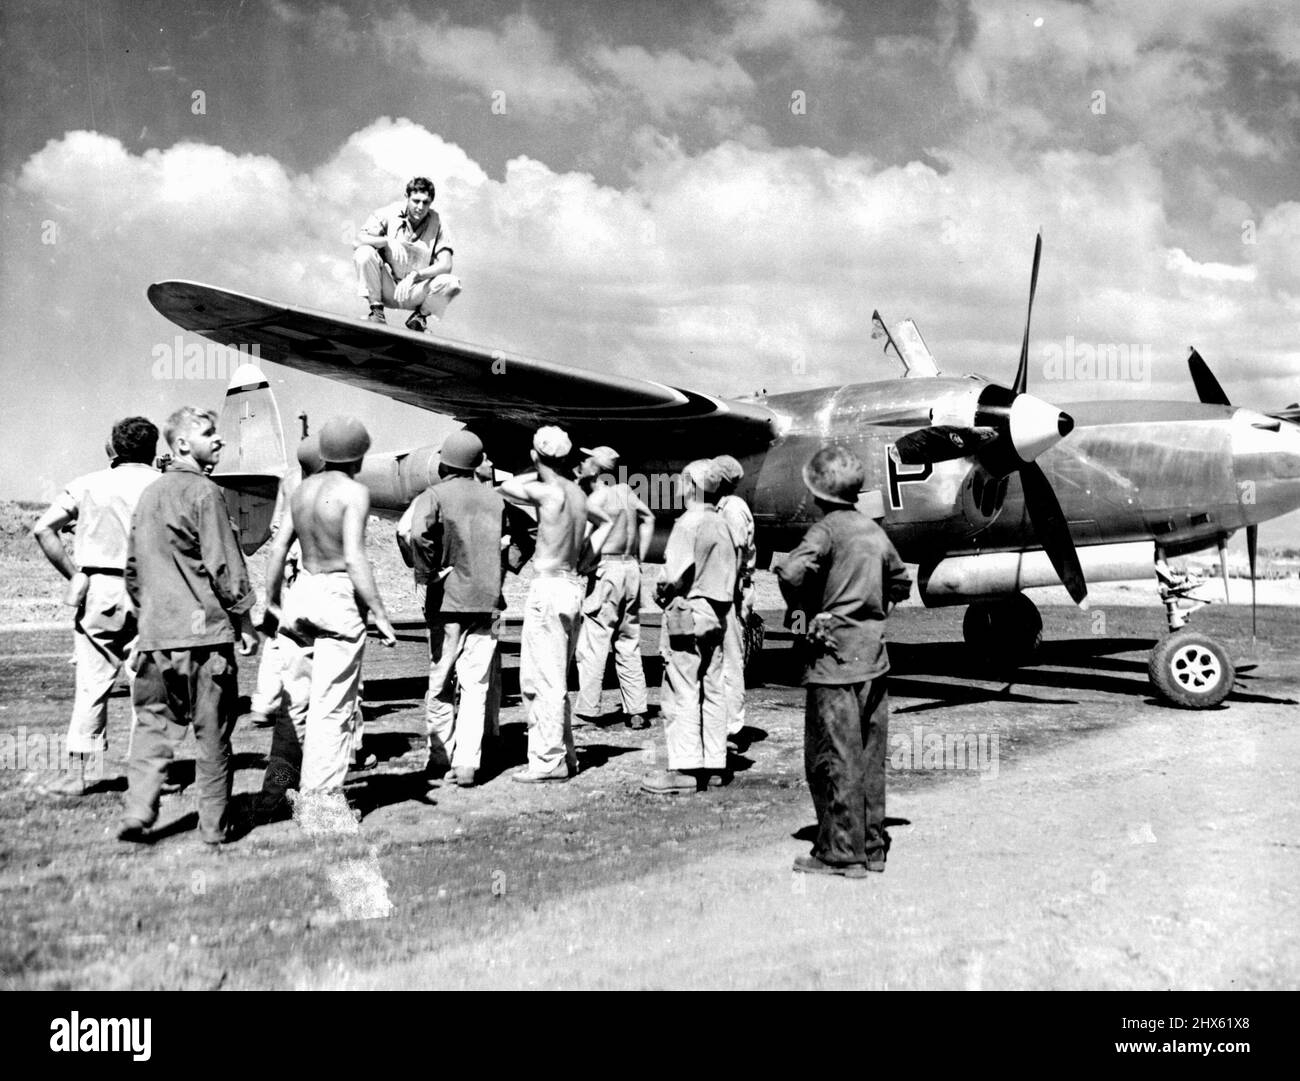 H.B. Graham of Yucaipa, Calif., Squatting on wing of his P-30, and ground crew men look over bullet holes which forced him down after he had knocked one Zero down and damaged another over Mindoro, Philippine Island. January 22, 1945. (Photo by U.S. Army Signal Corps Photo).;H.B. Graham of Yucaipa, Calif., Squatting on wing of his P-30, and ground crew men look over bullet holes which forced him down after he had knocked one Zero down and damaged another over Mindoro, Philippine Island. Stock Photo